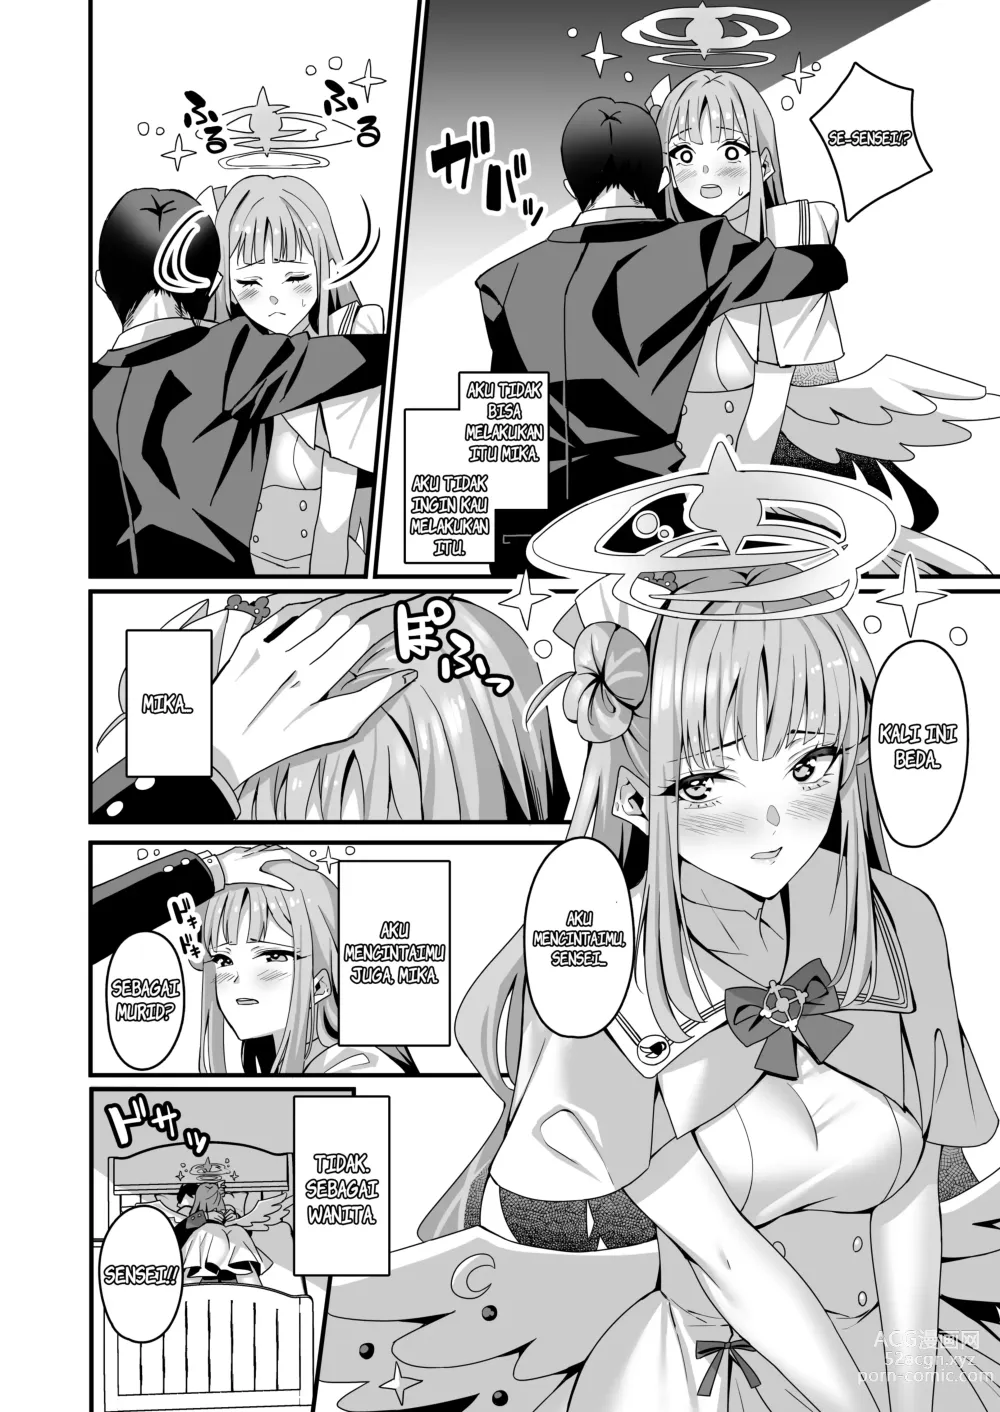 Page 5 of doujinshi Mika to Happy Love Love Sex Shite Haramaseru Hon - A book about happy loving sex with Mika and impregnation.